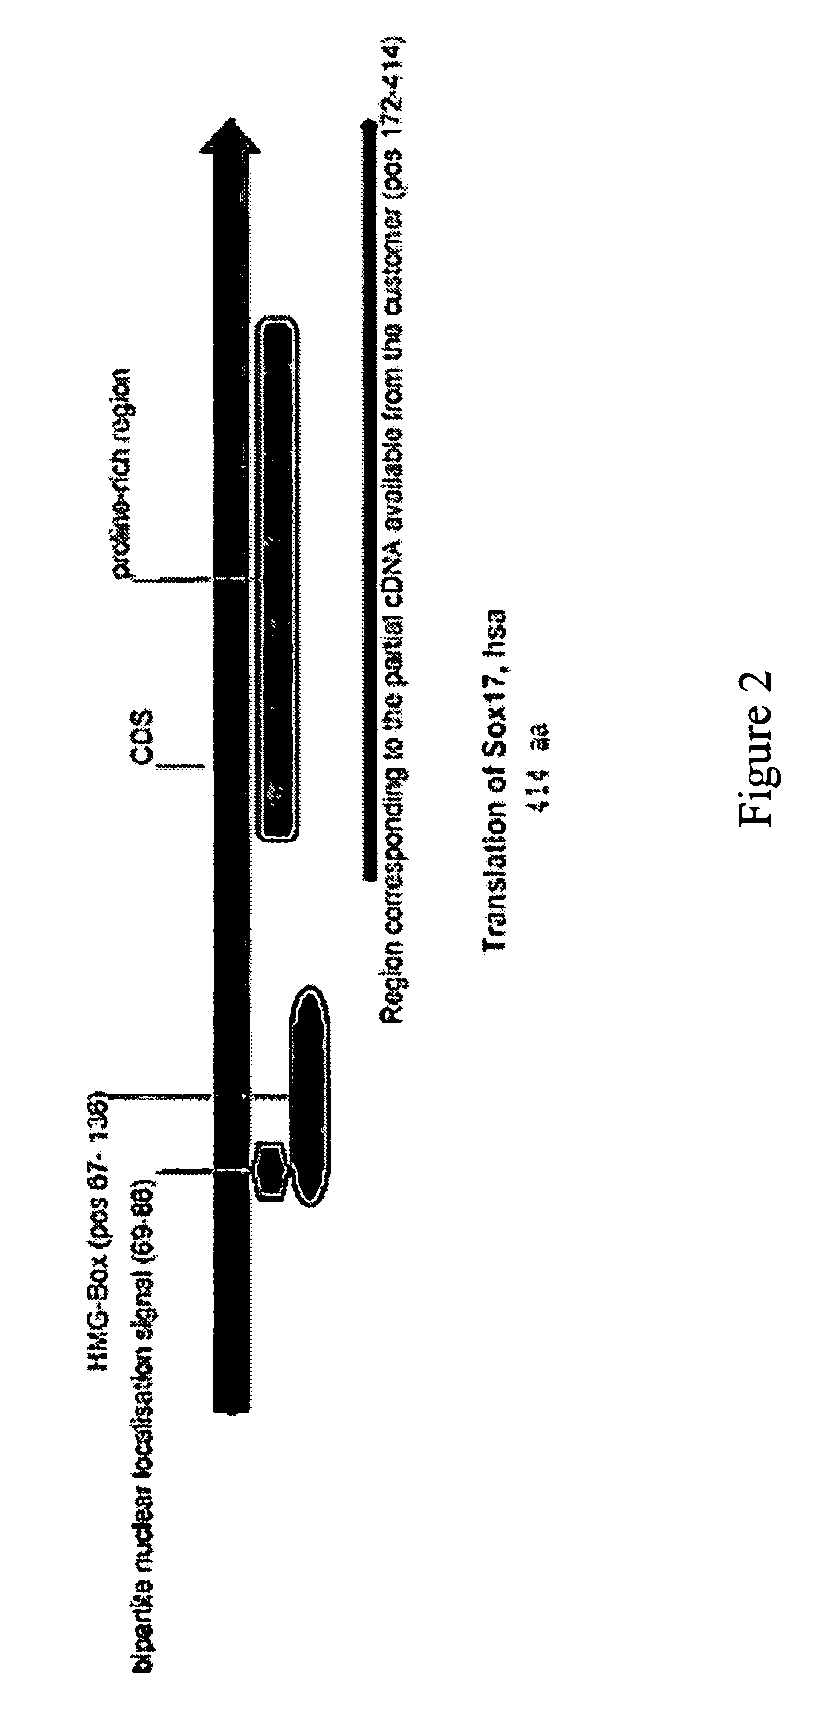 Methods for identifying factors for differentiating definitive endoderm